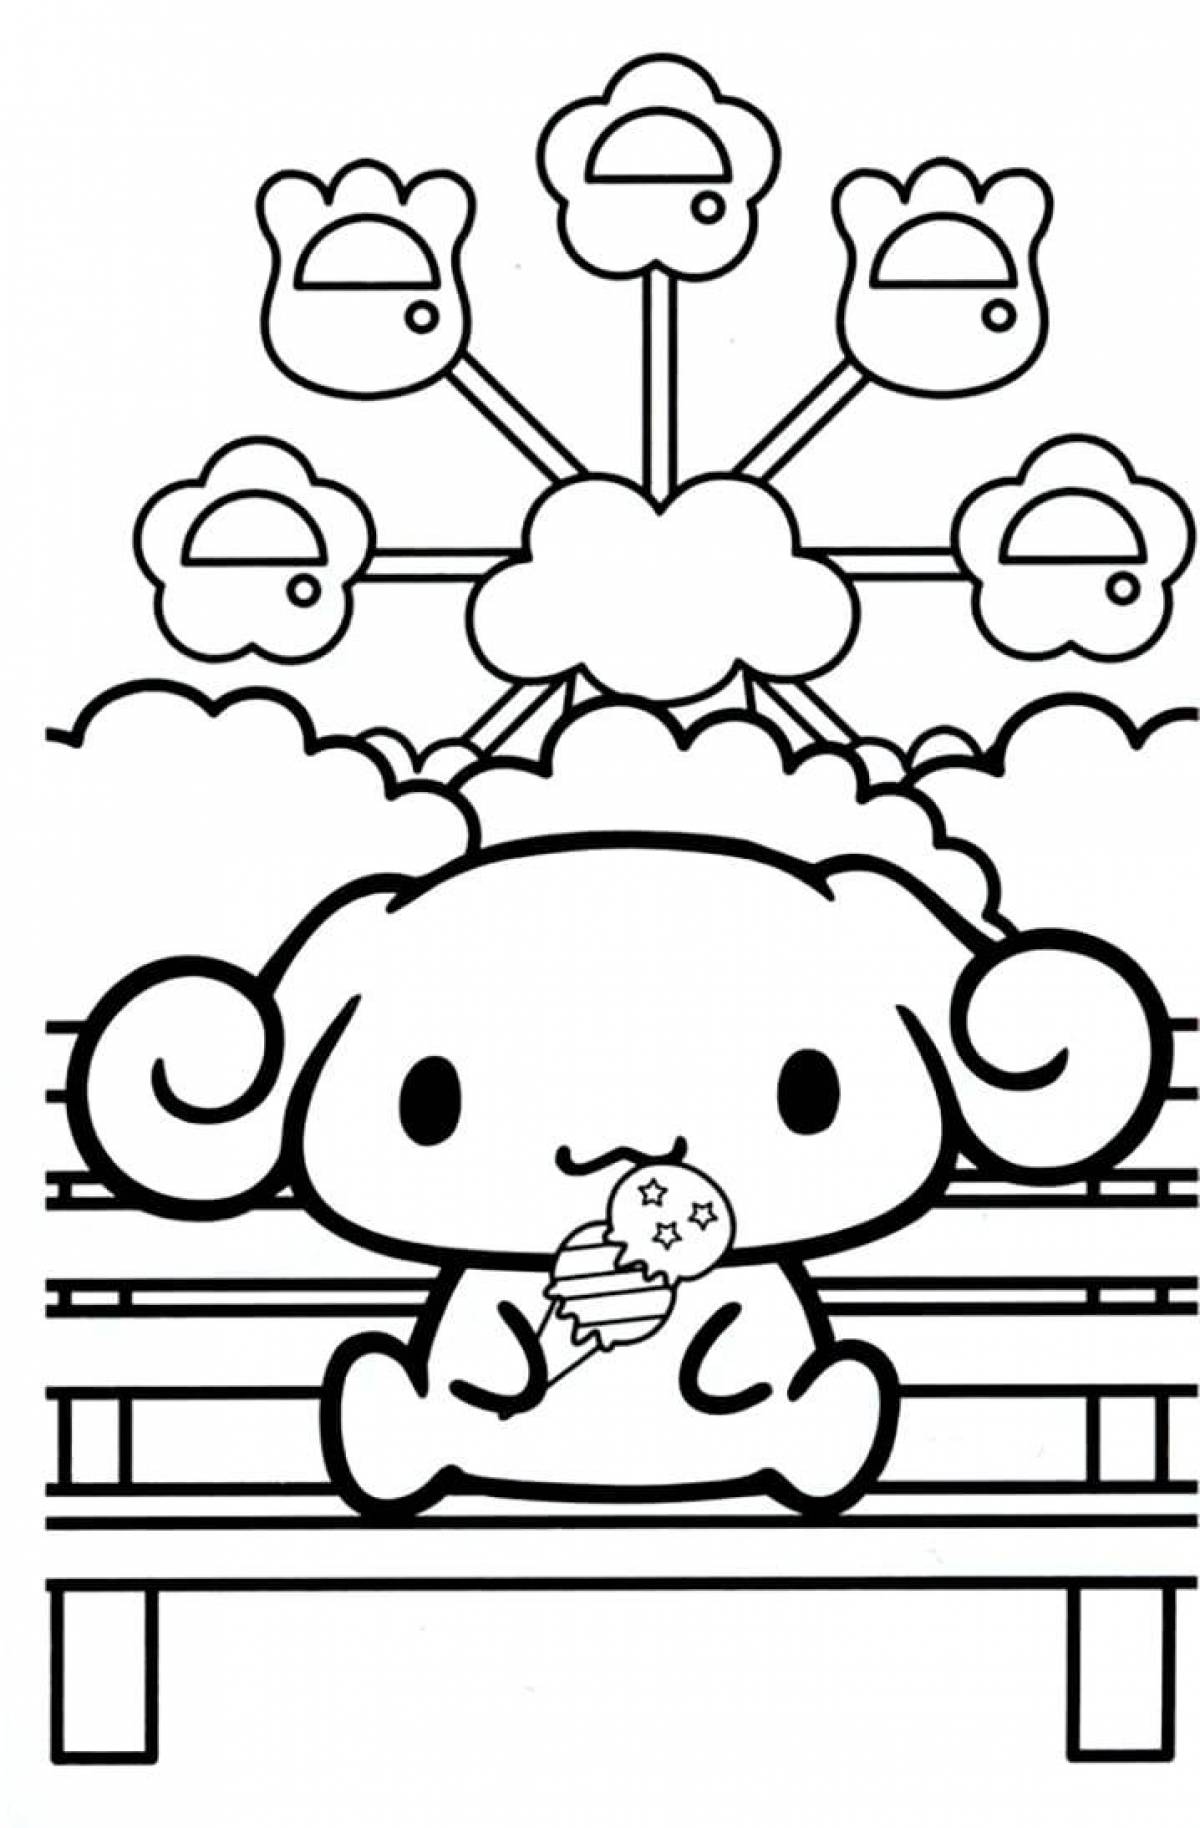 Coloring book fairy tale may melody